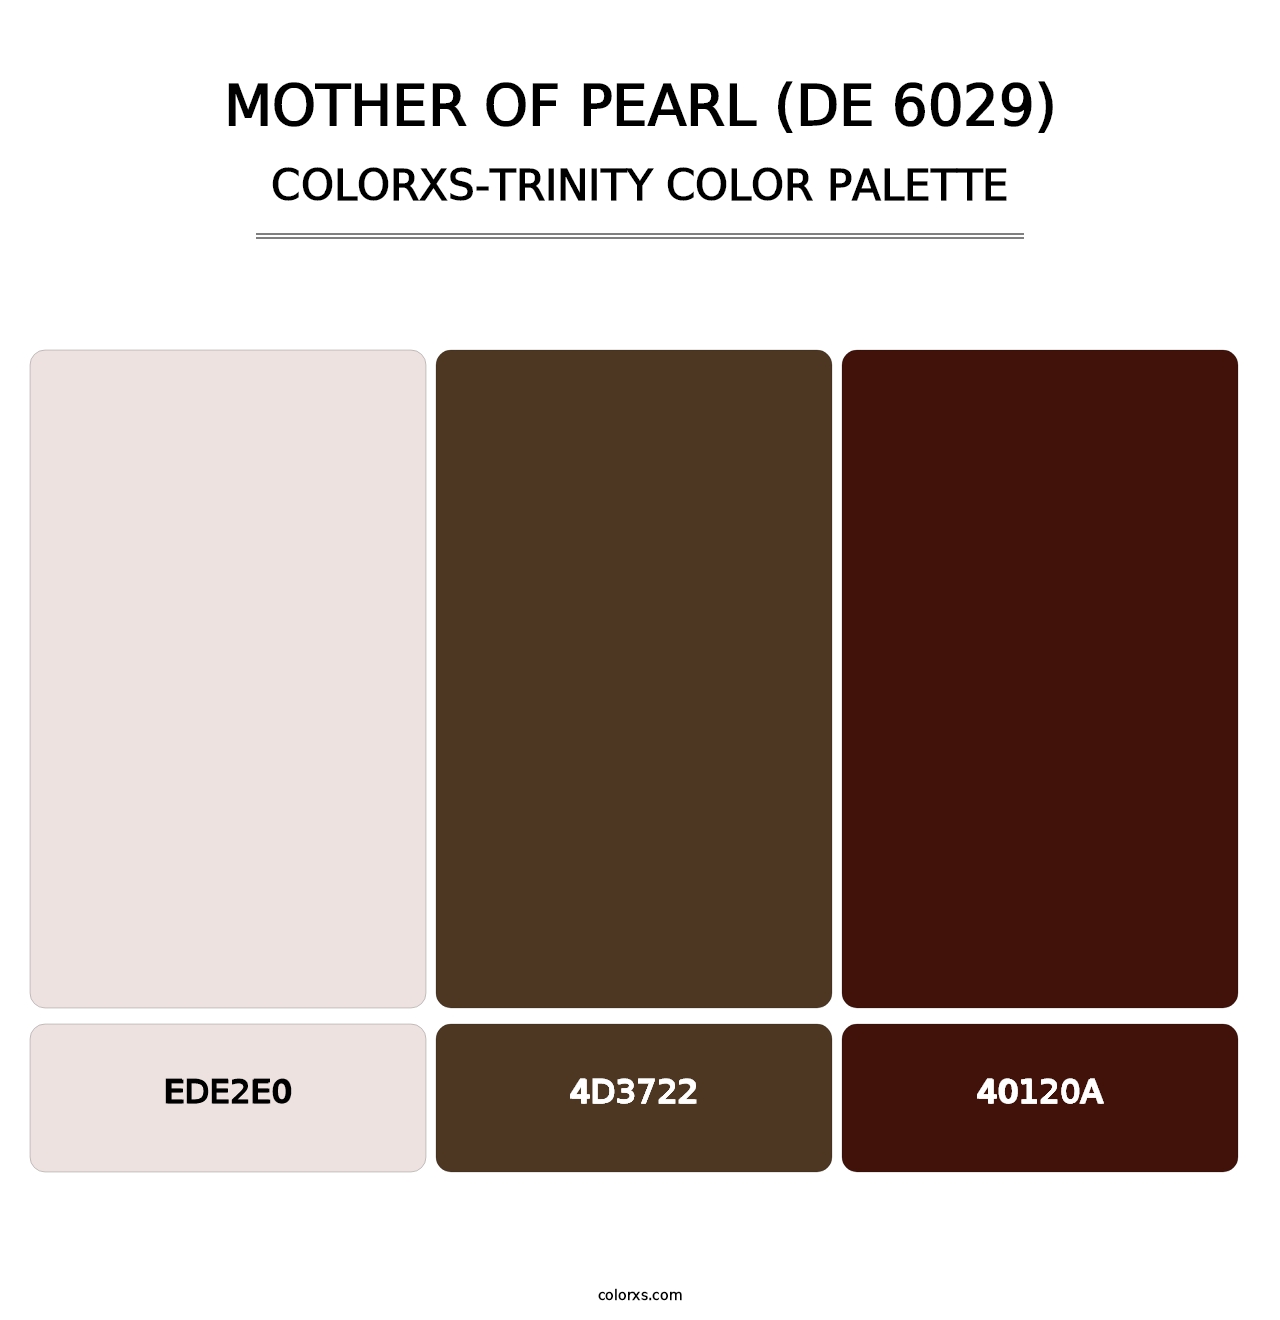 Mother of Pearl (DE 6029) - Colorxs Trinity Palette